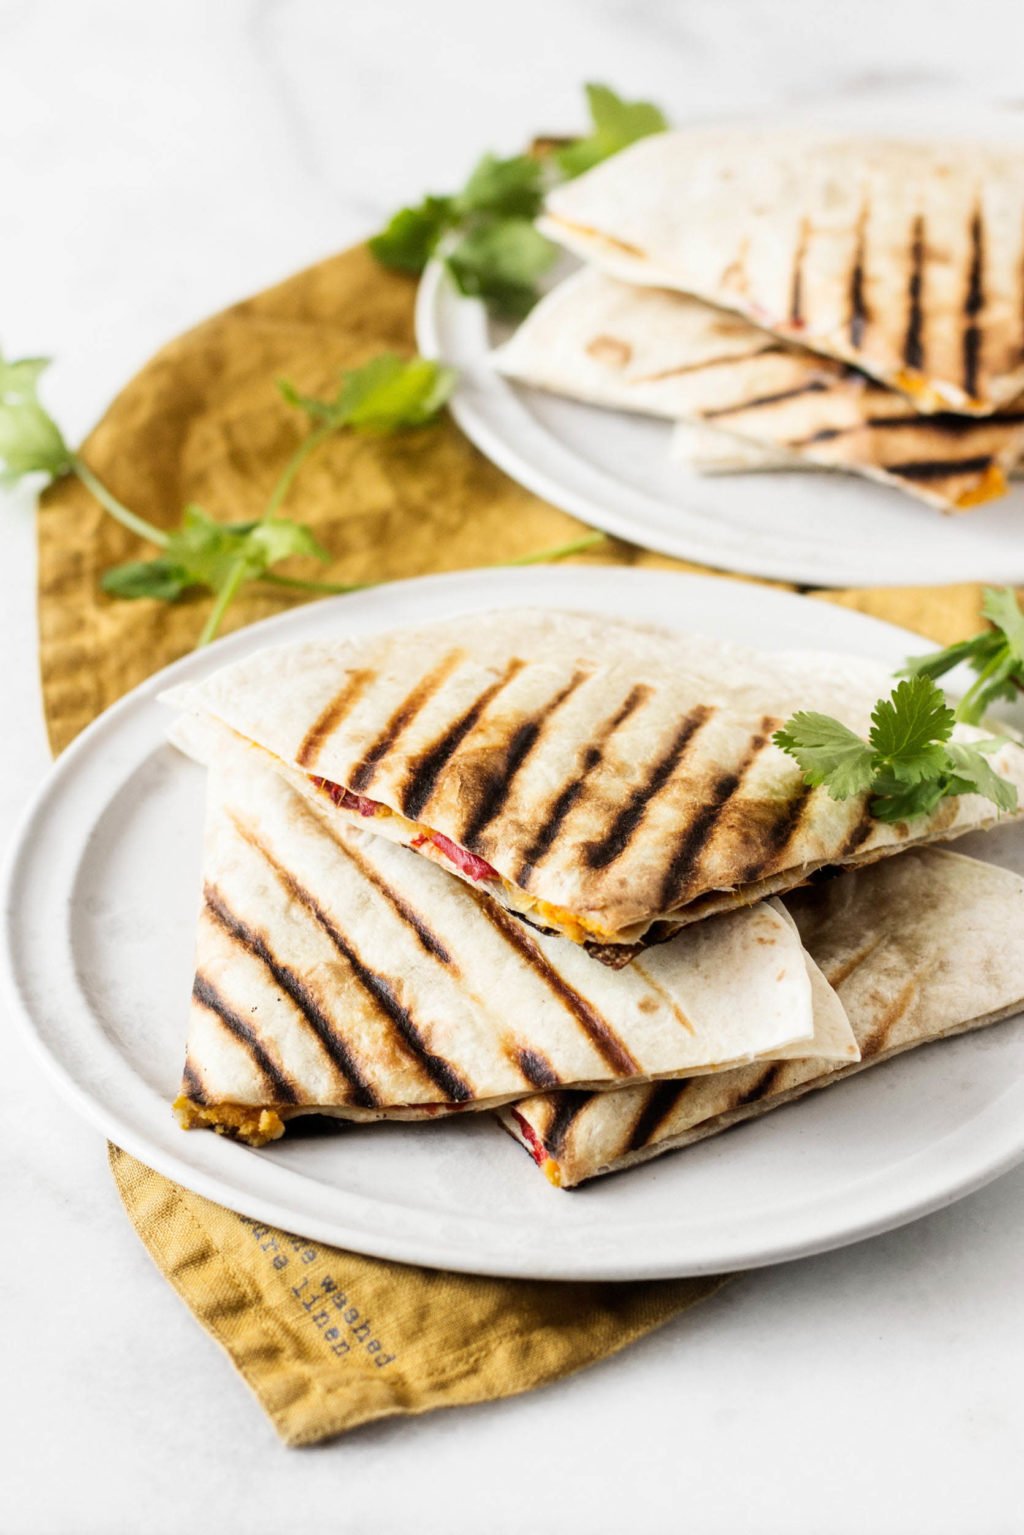 A stack of quesadillas has been prepared with plant-based ingredients. It's resting on a white plate and rust colored napkin.